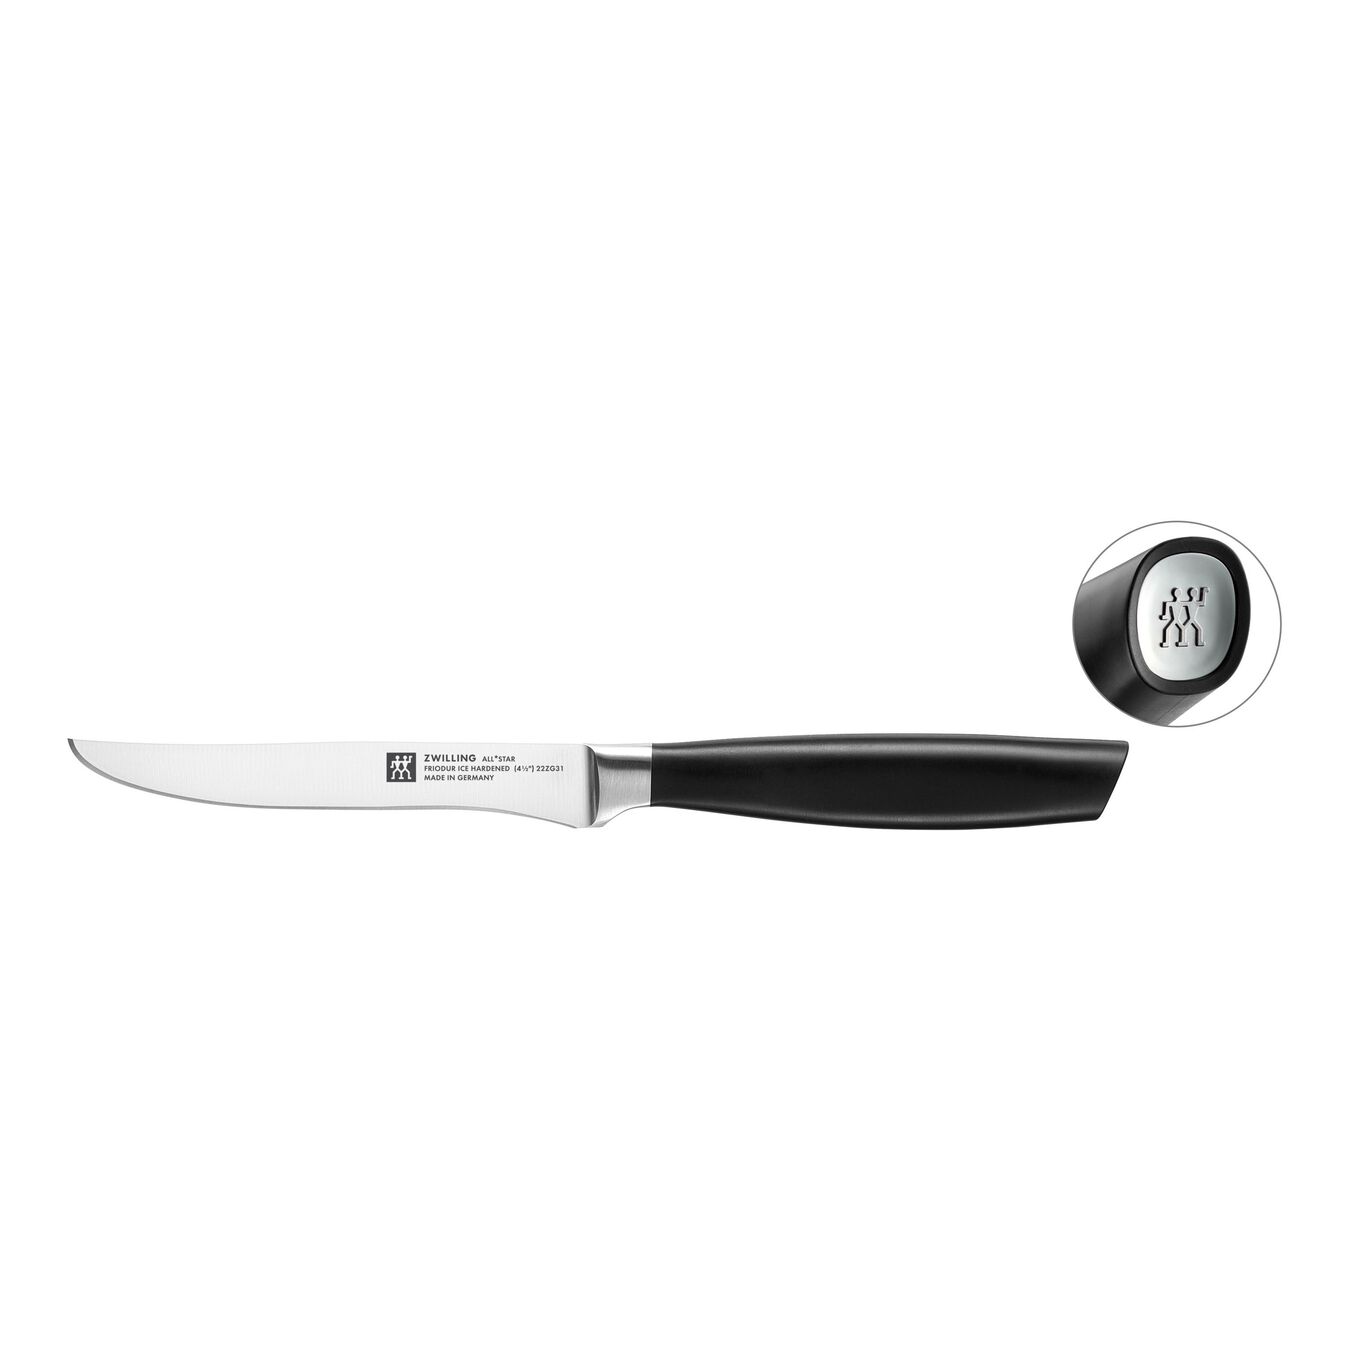 Grill kniv 12 cm, Silver,,large 1